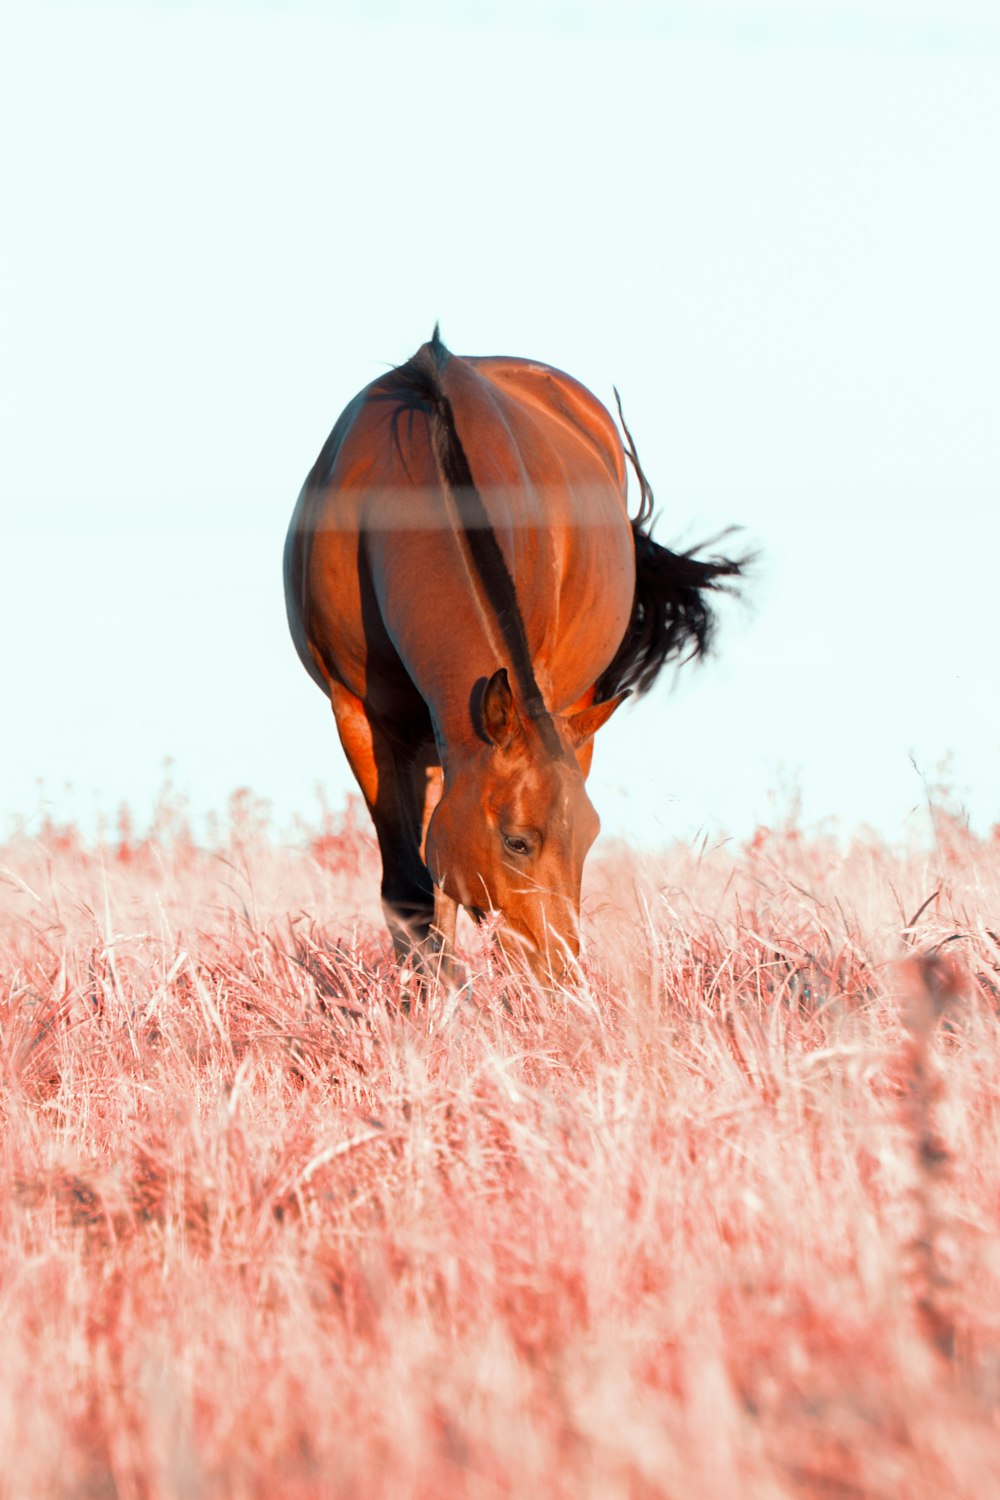 brown horse on brown grass field during daytime